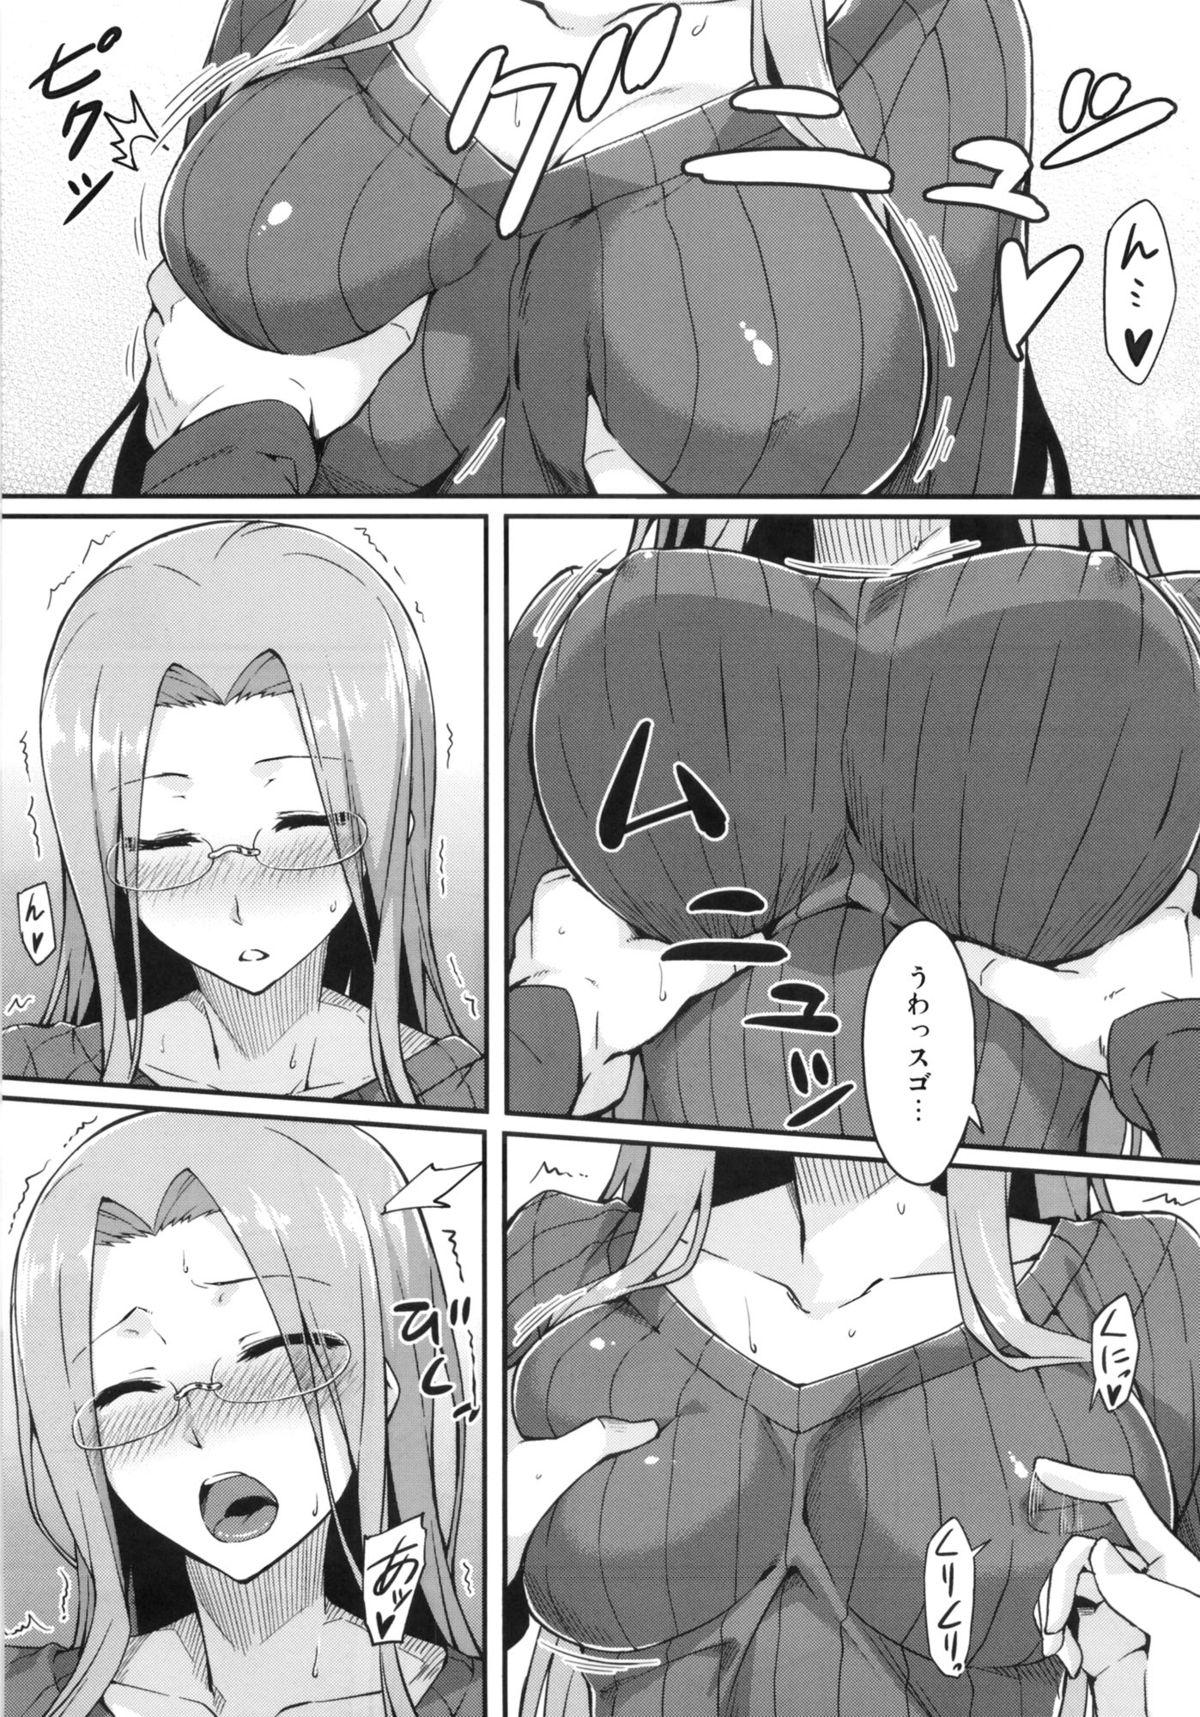 Clothed Rider-san to Tate Sweater. - Fate hollow ataraxia Bigtits - Page 6